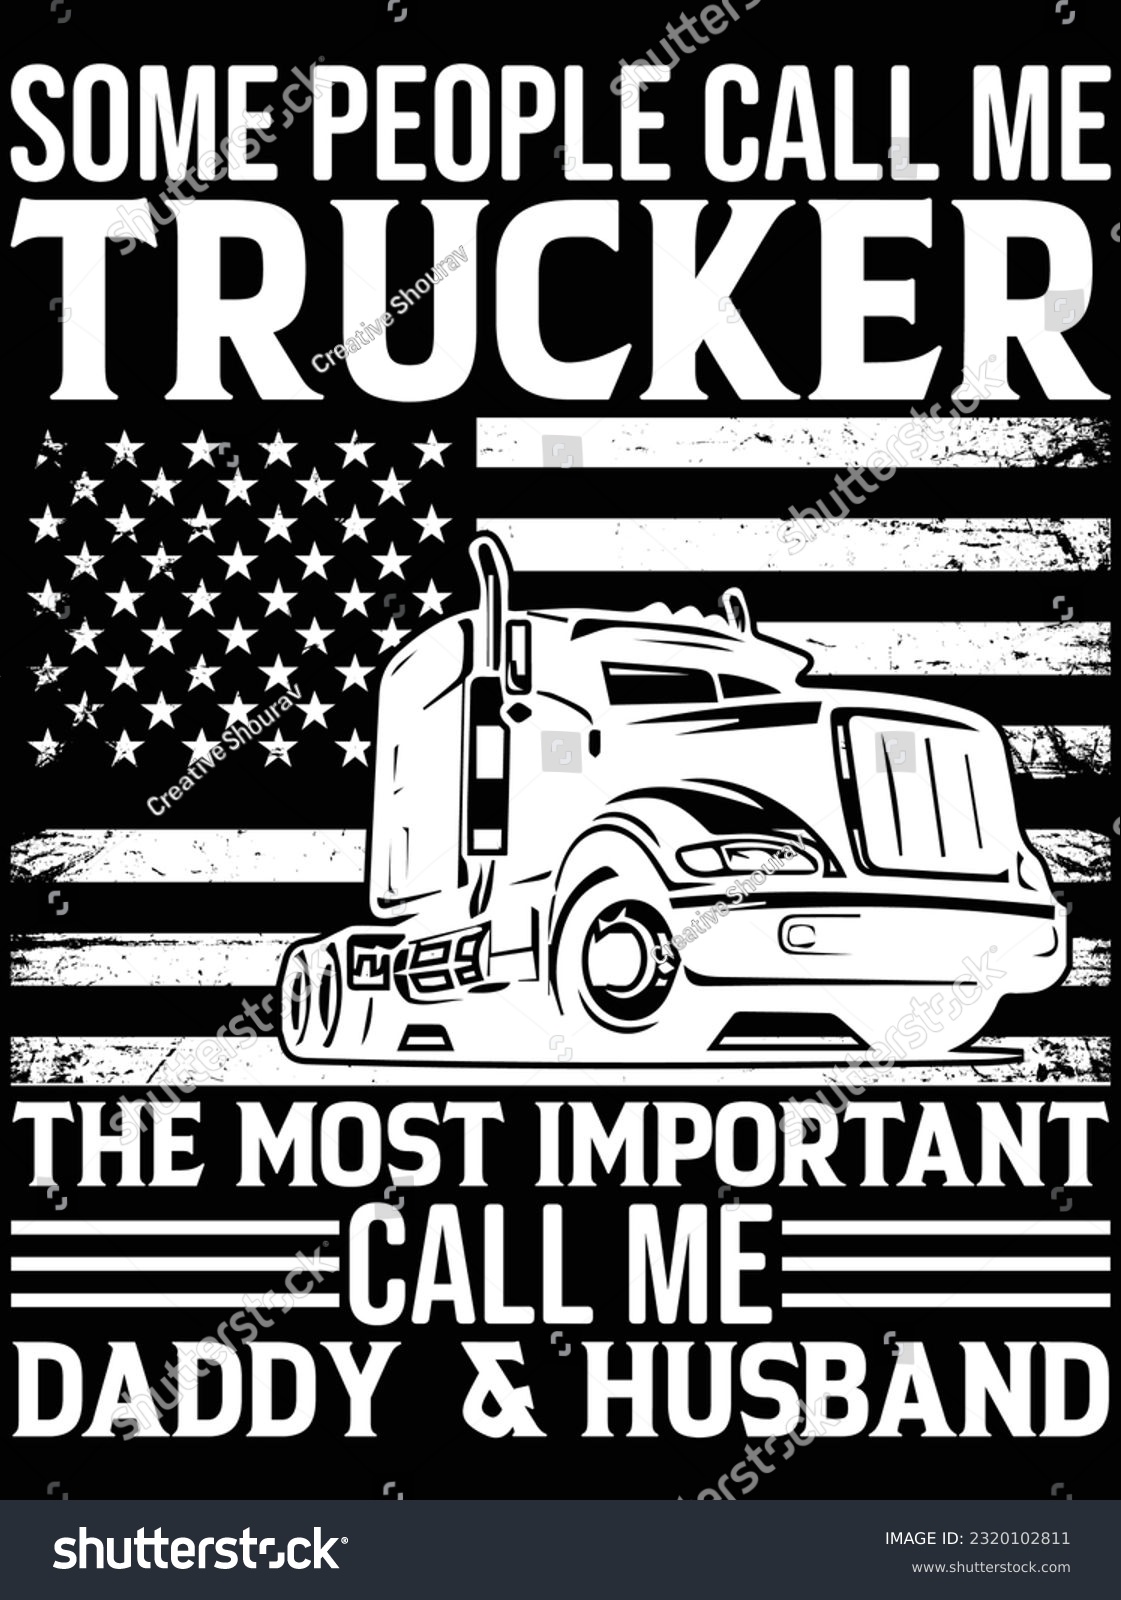 SVG of Some people call me trucker the most important vector art design, eps file. design file for t-shirt. SVG, EPS cuttable design file svg